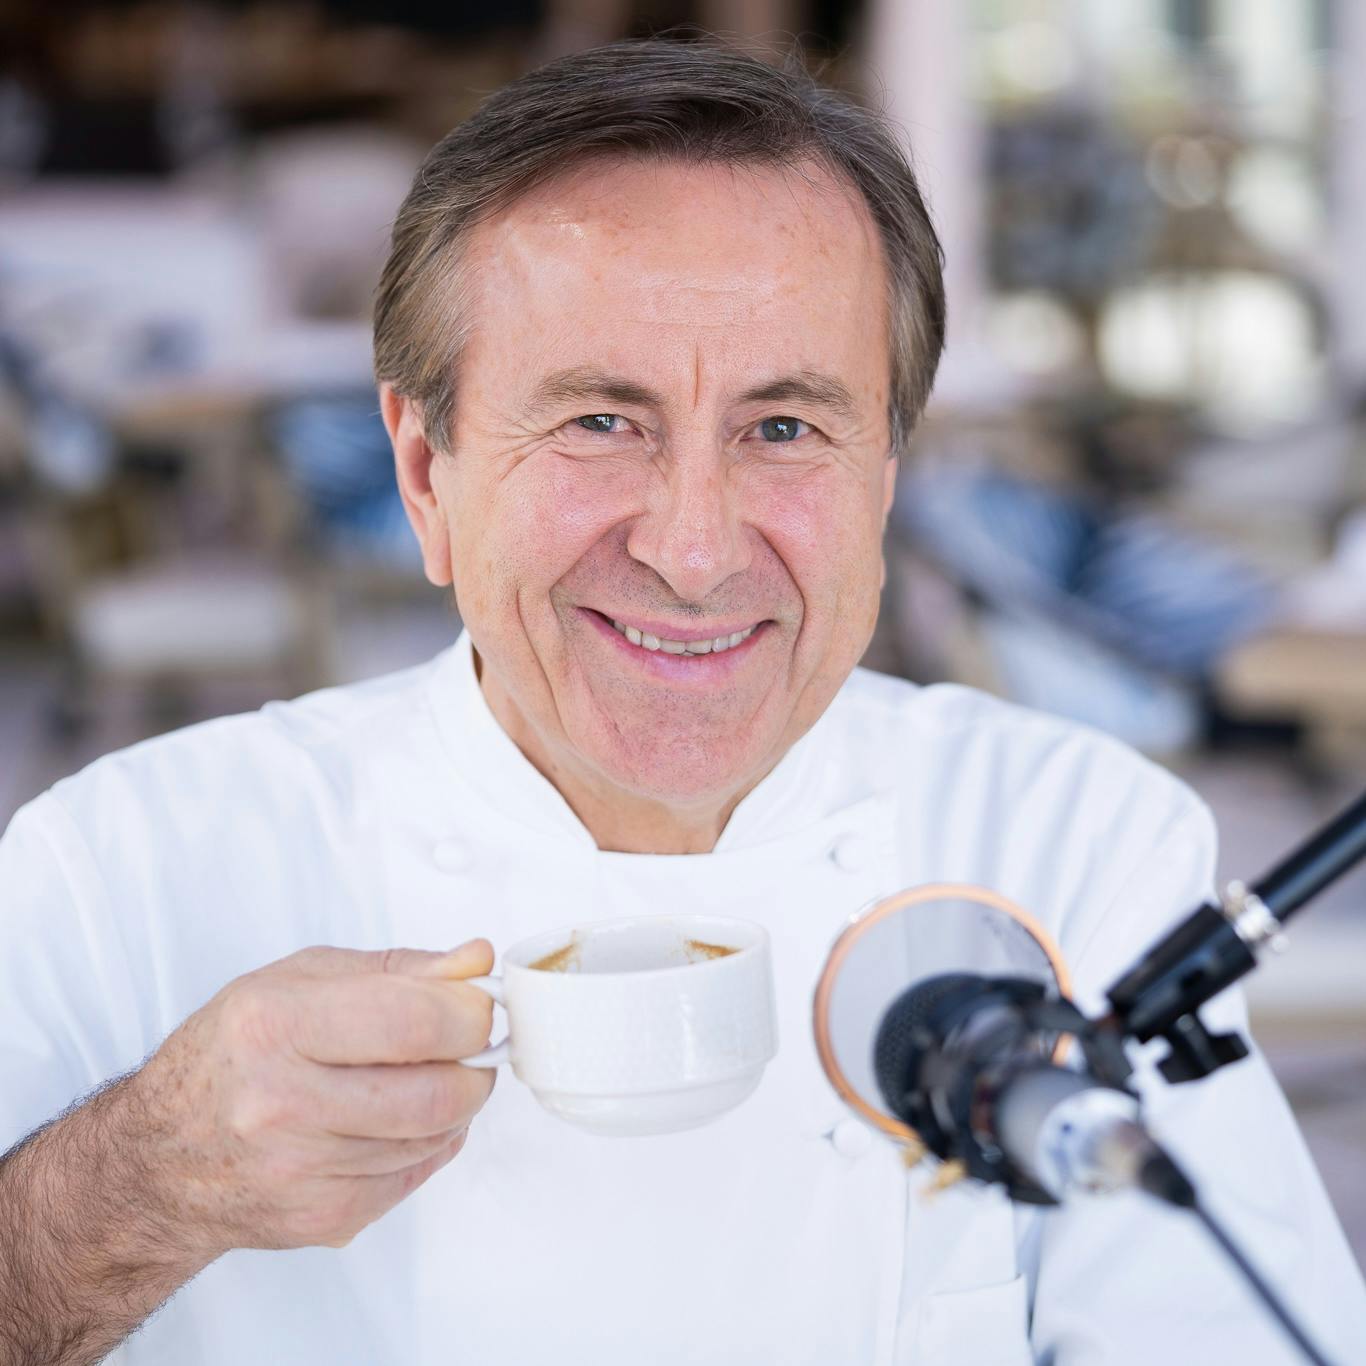 Gear your life towards more than one legacy,’ Michelin Star Chef Daniel Boulud on wearing multiple hats to turbocharge a successful multi-decade career